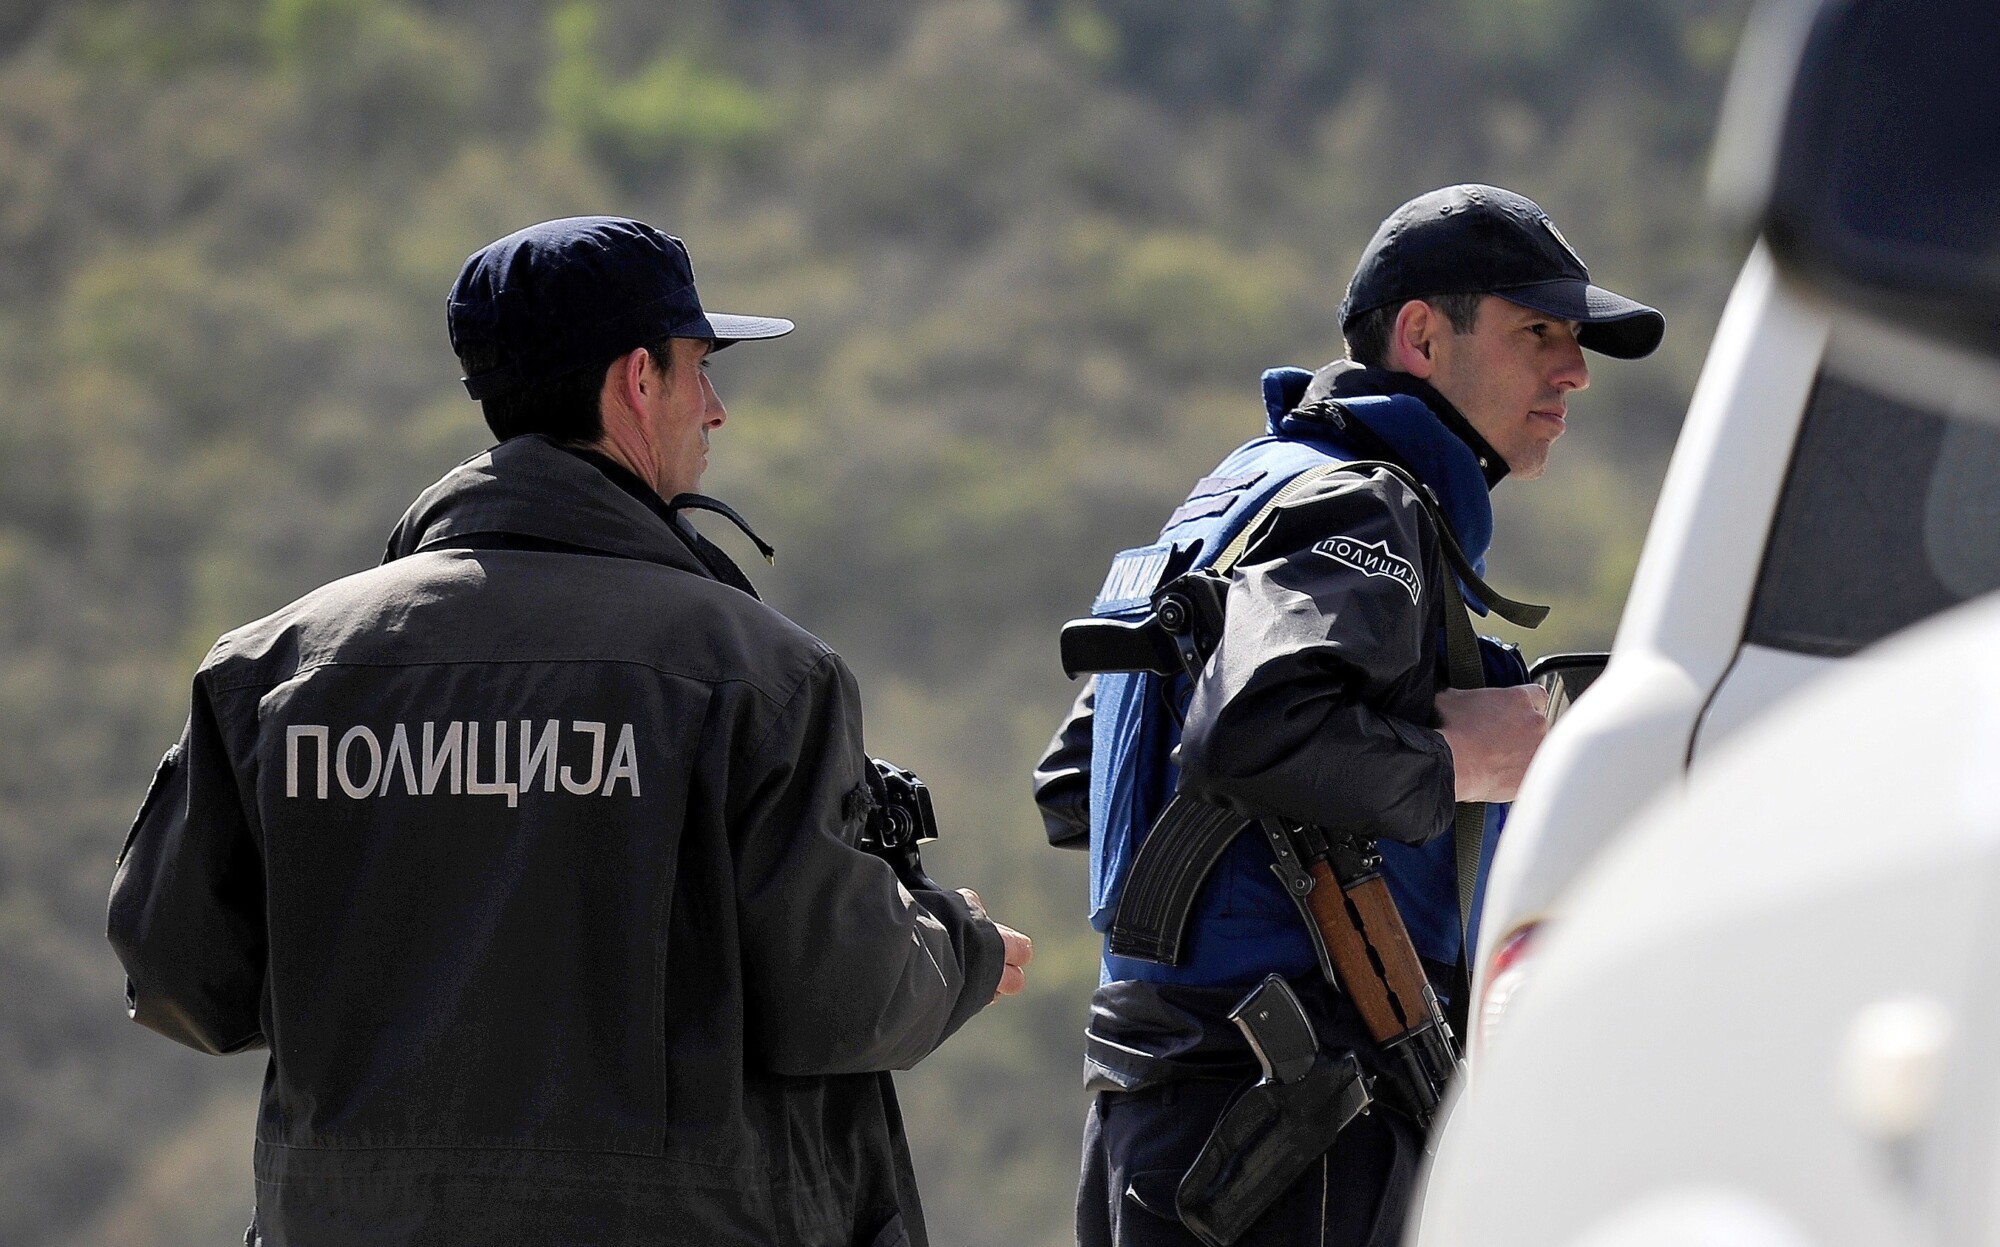 North Macedonia: Police Find 87 Illegal Immigrants, Arrest Two Men